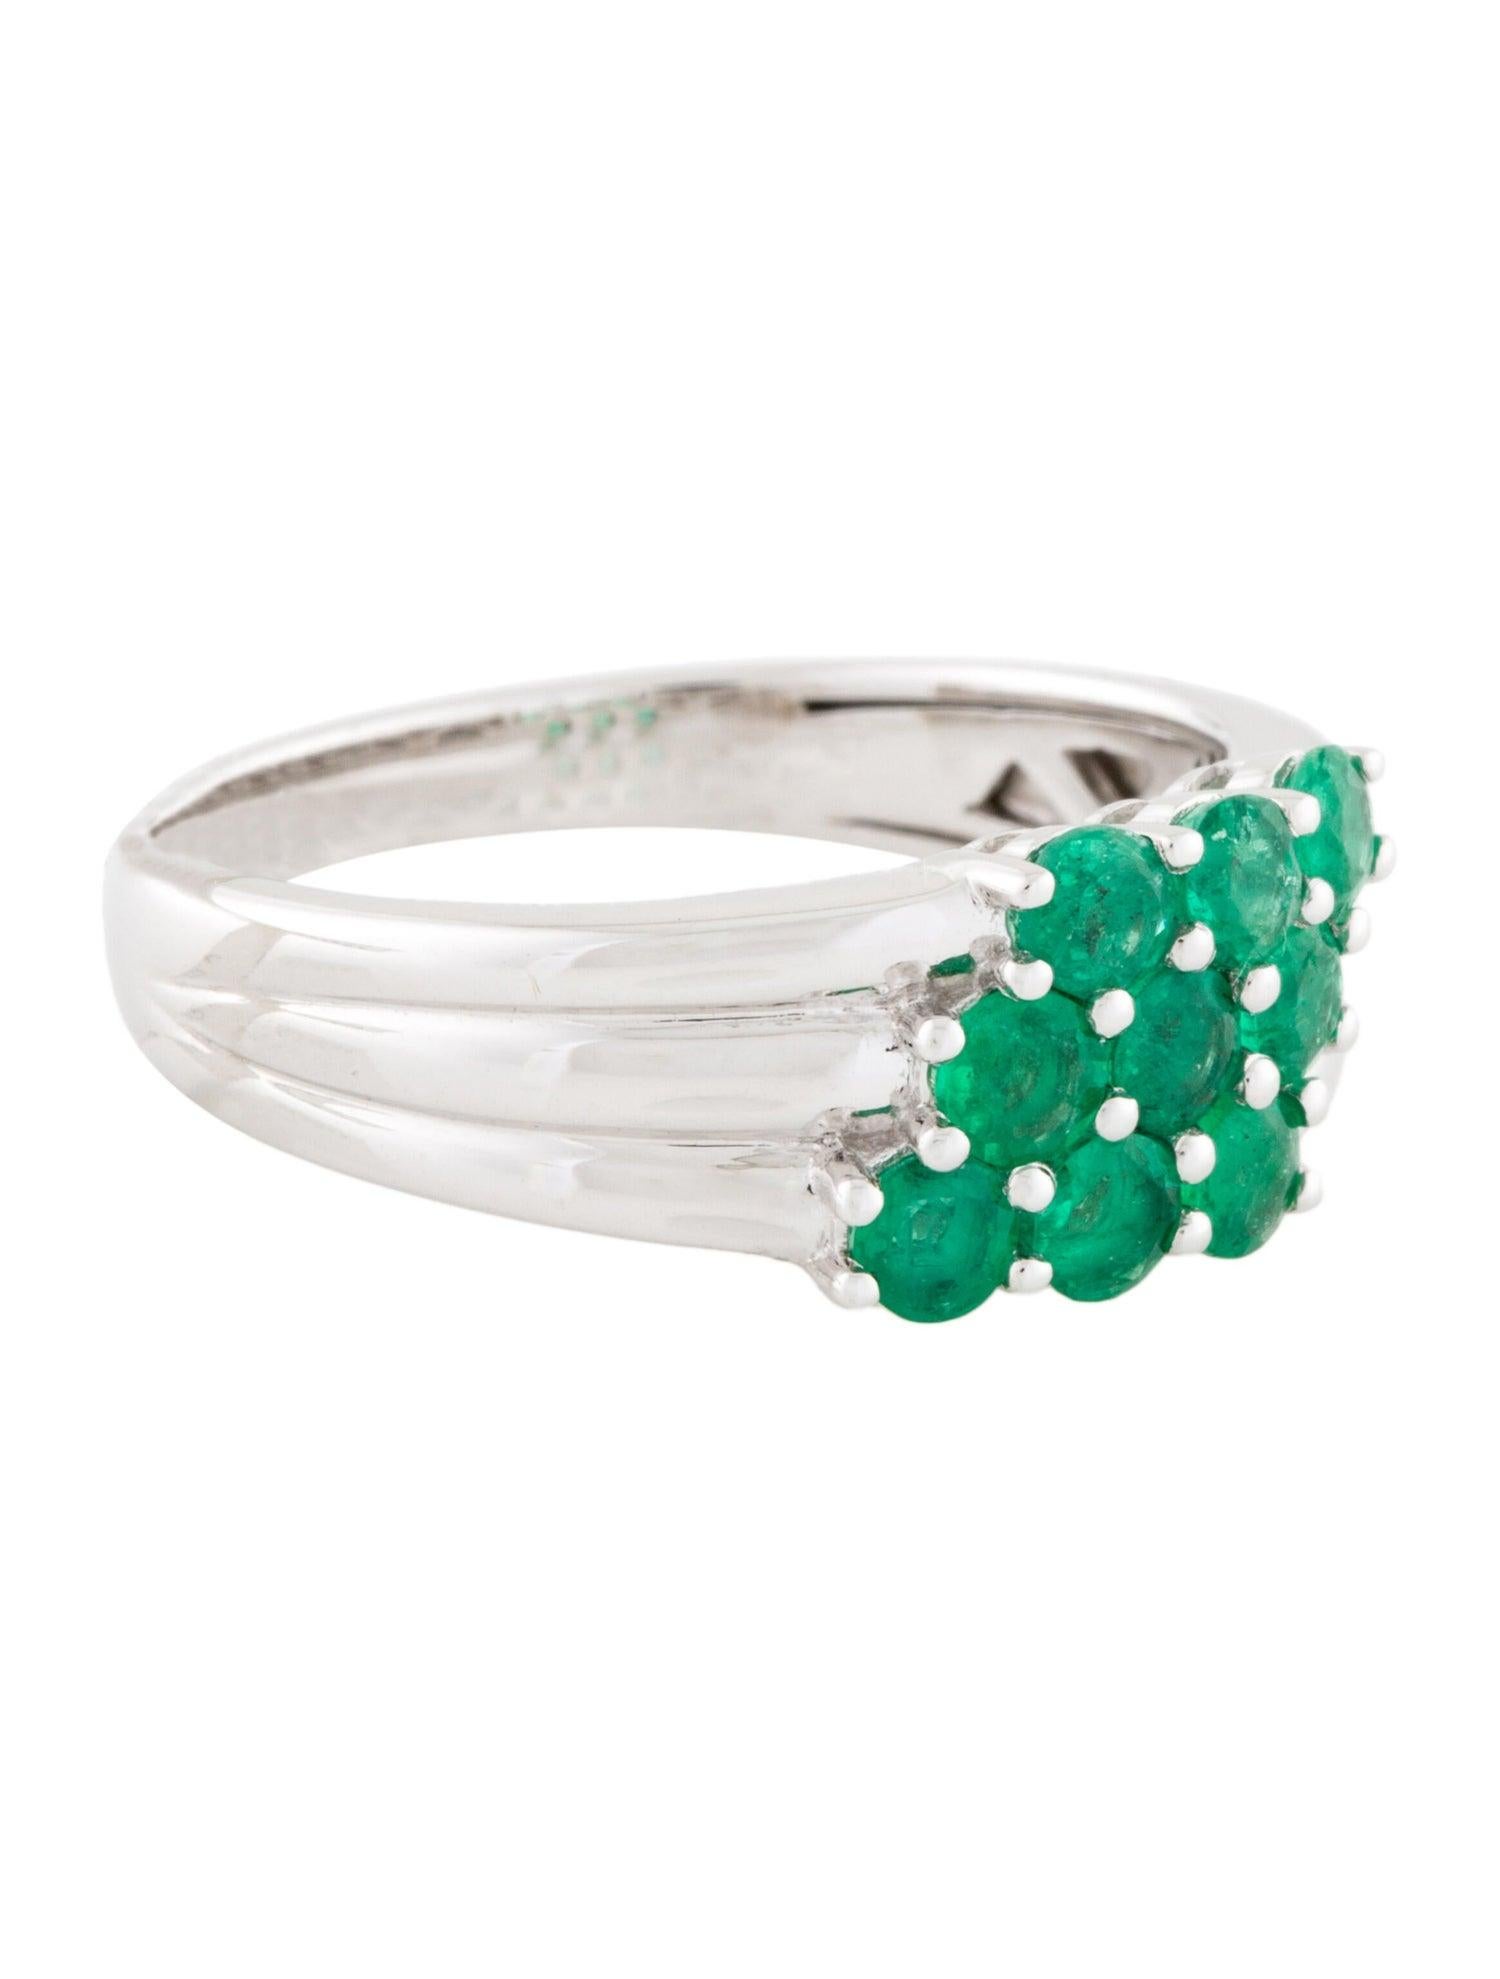 Immerse yourself in the captivating allure of our Forest Ferns collection with the Enchanted Emerald Ring. This exquisite piece features a resplendent emerald that captures the essence of lush, verdant forests. Crafted with meticulous attention to